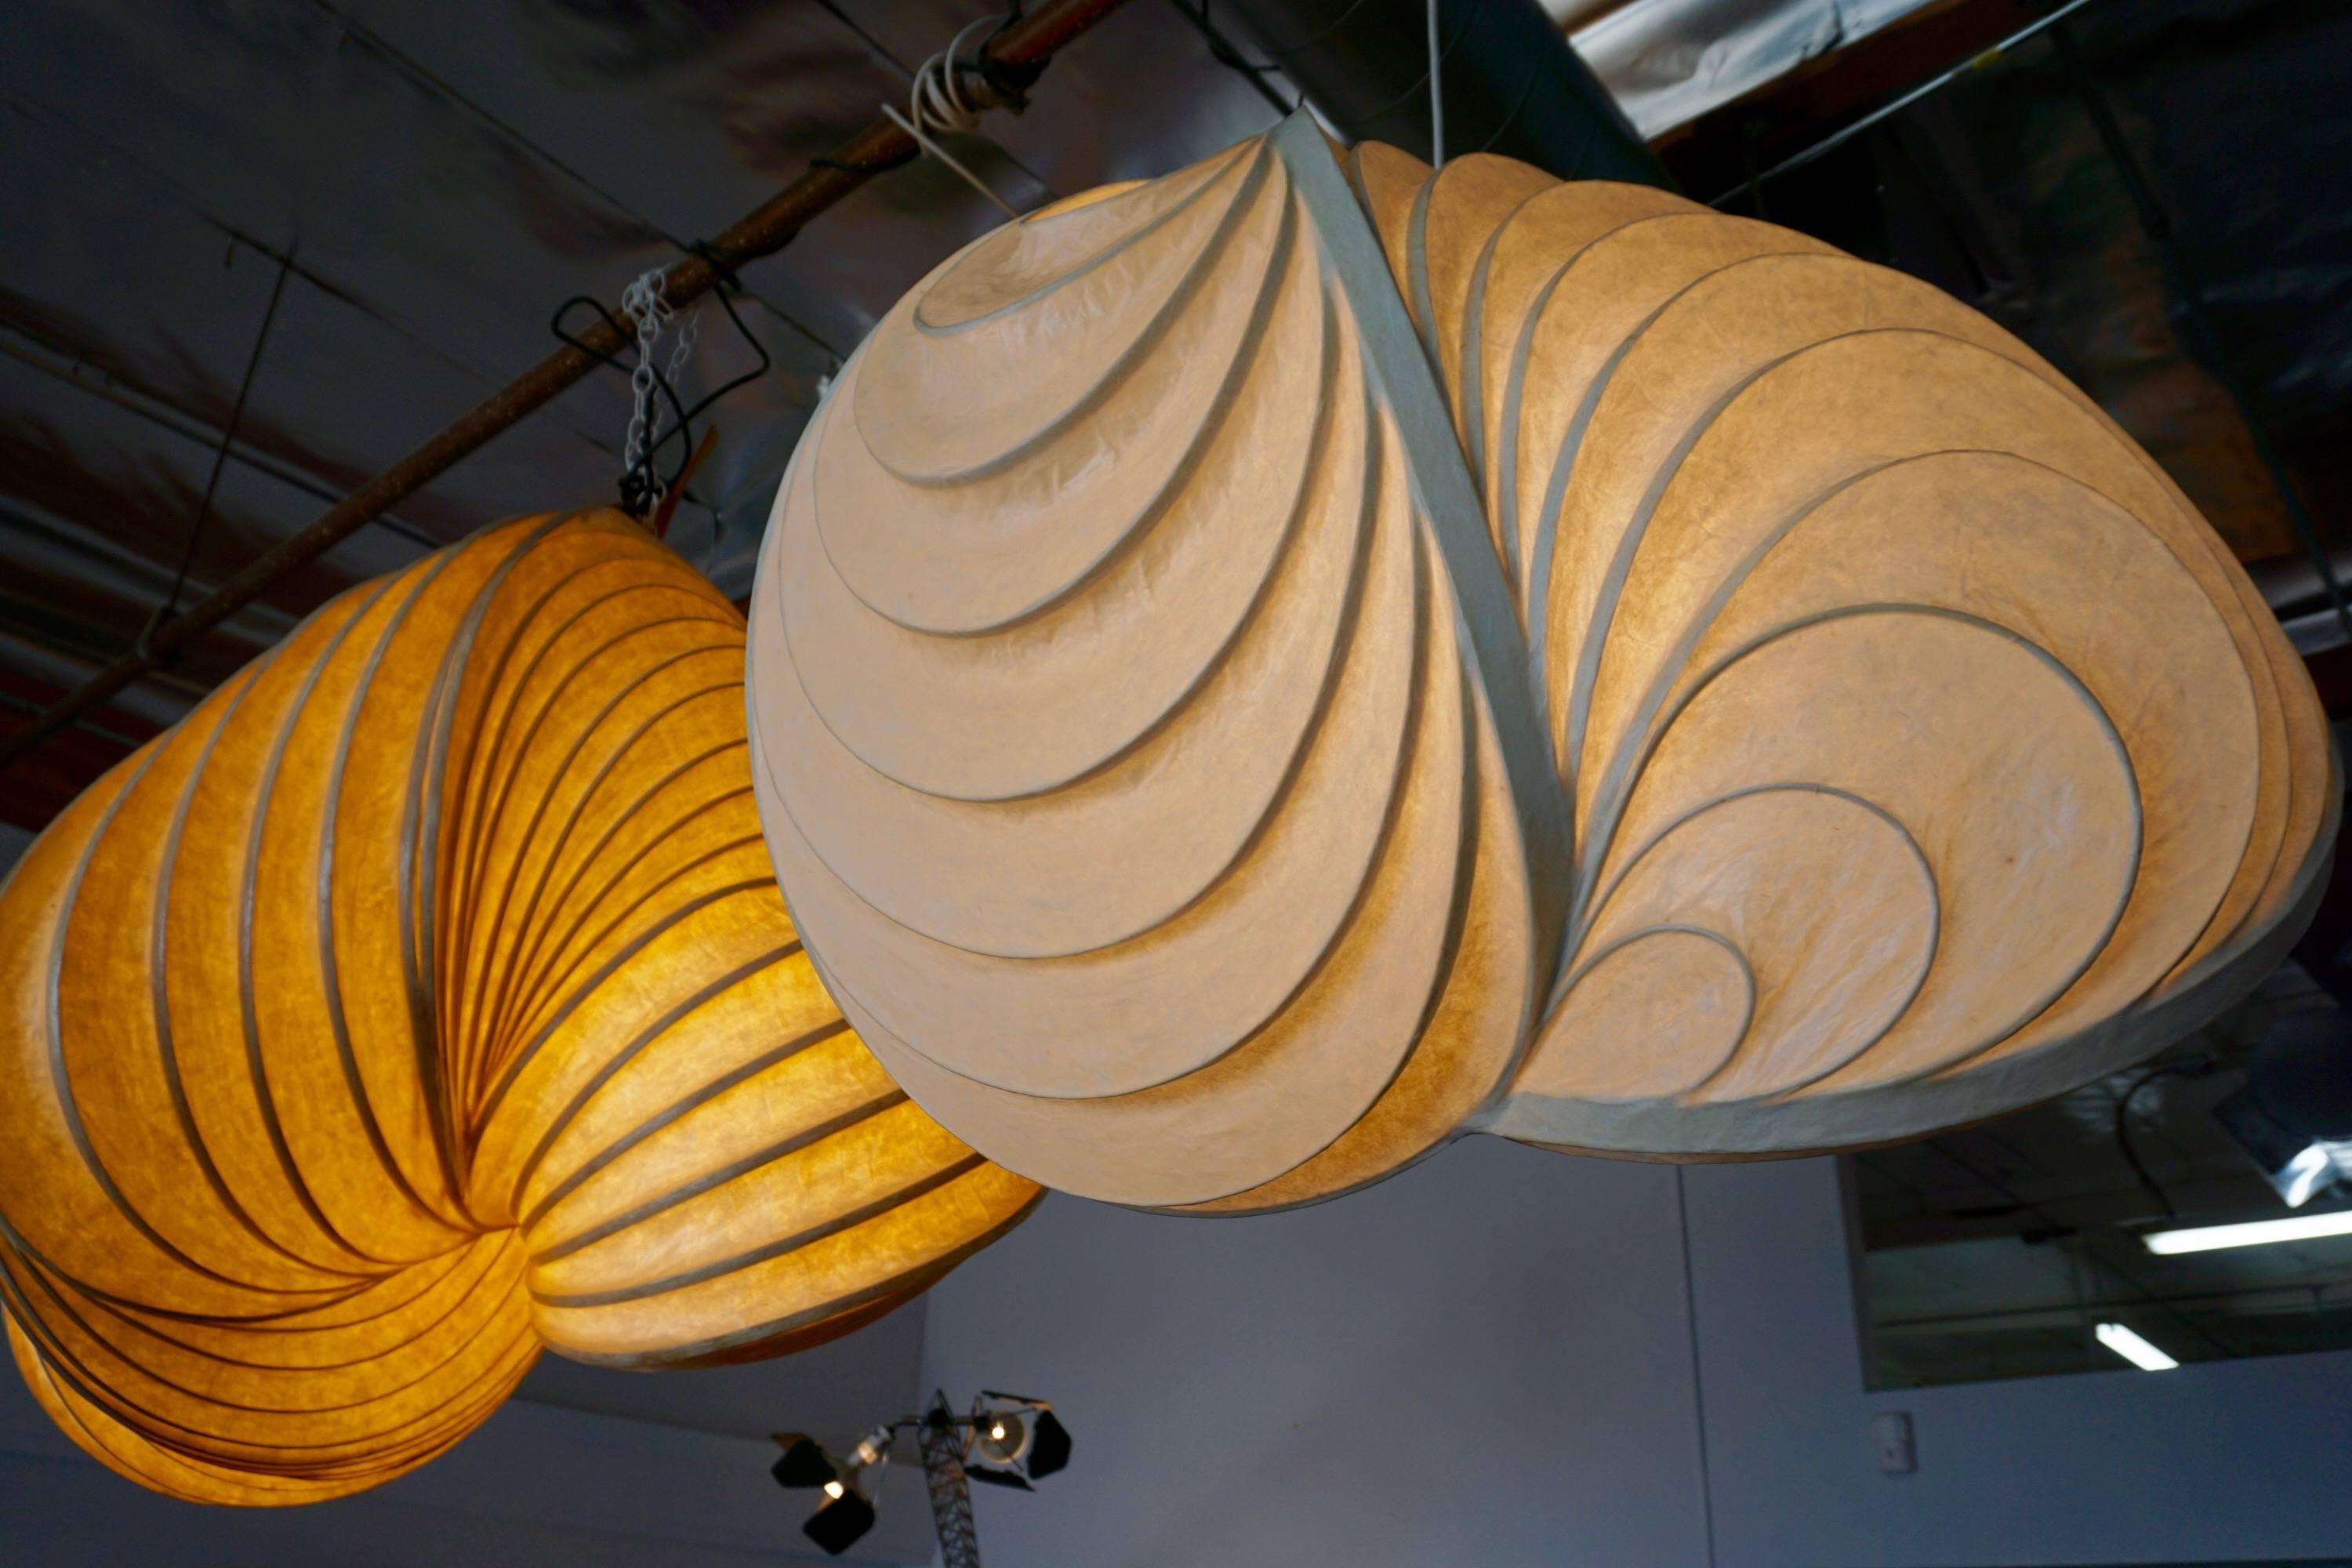 Stephen White created these one of a kind light sculptures with bentwood and a fiber resin technique to emulate rice paper.